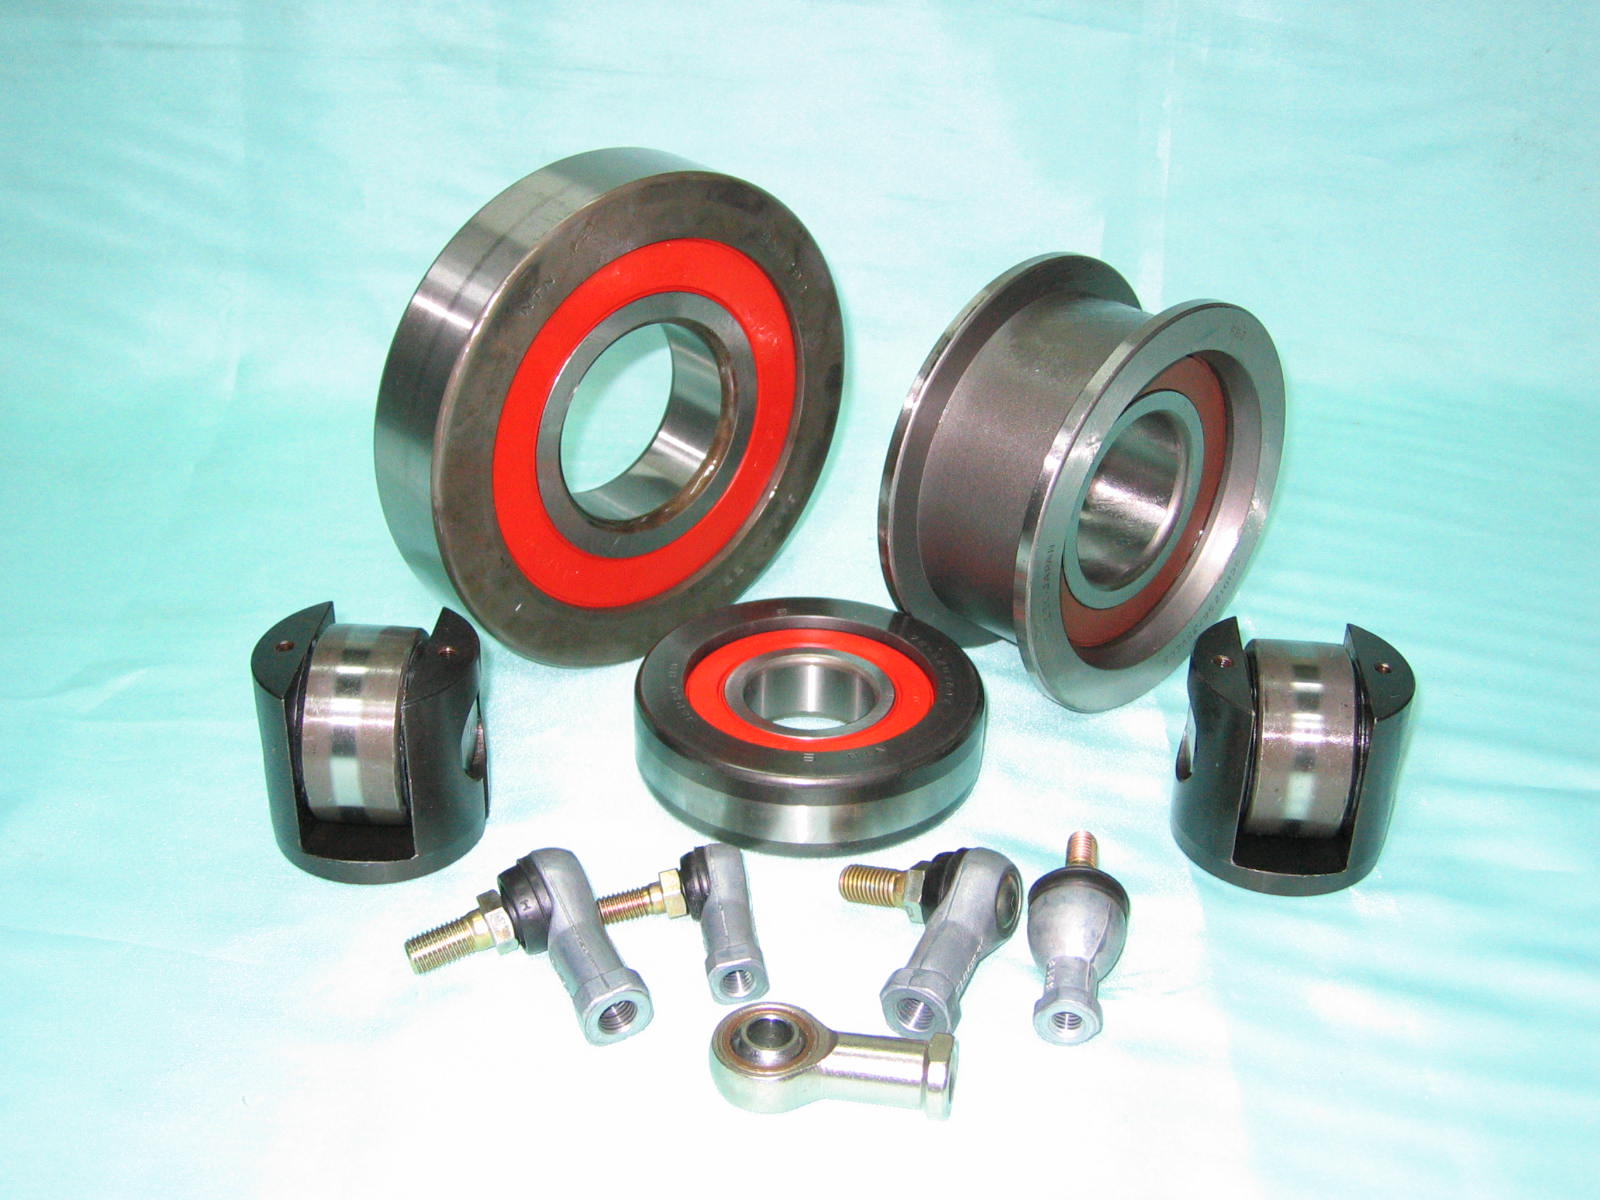 Rod-Ends, Forklift Bearings, and steel balls with different sizes and hardness